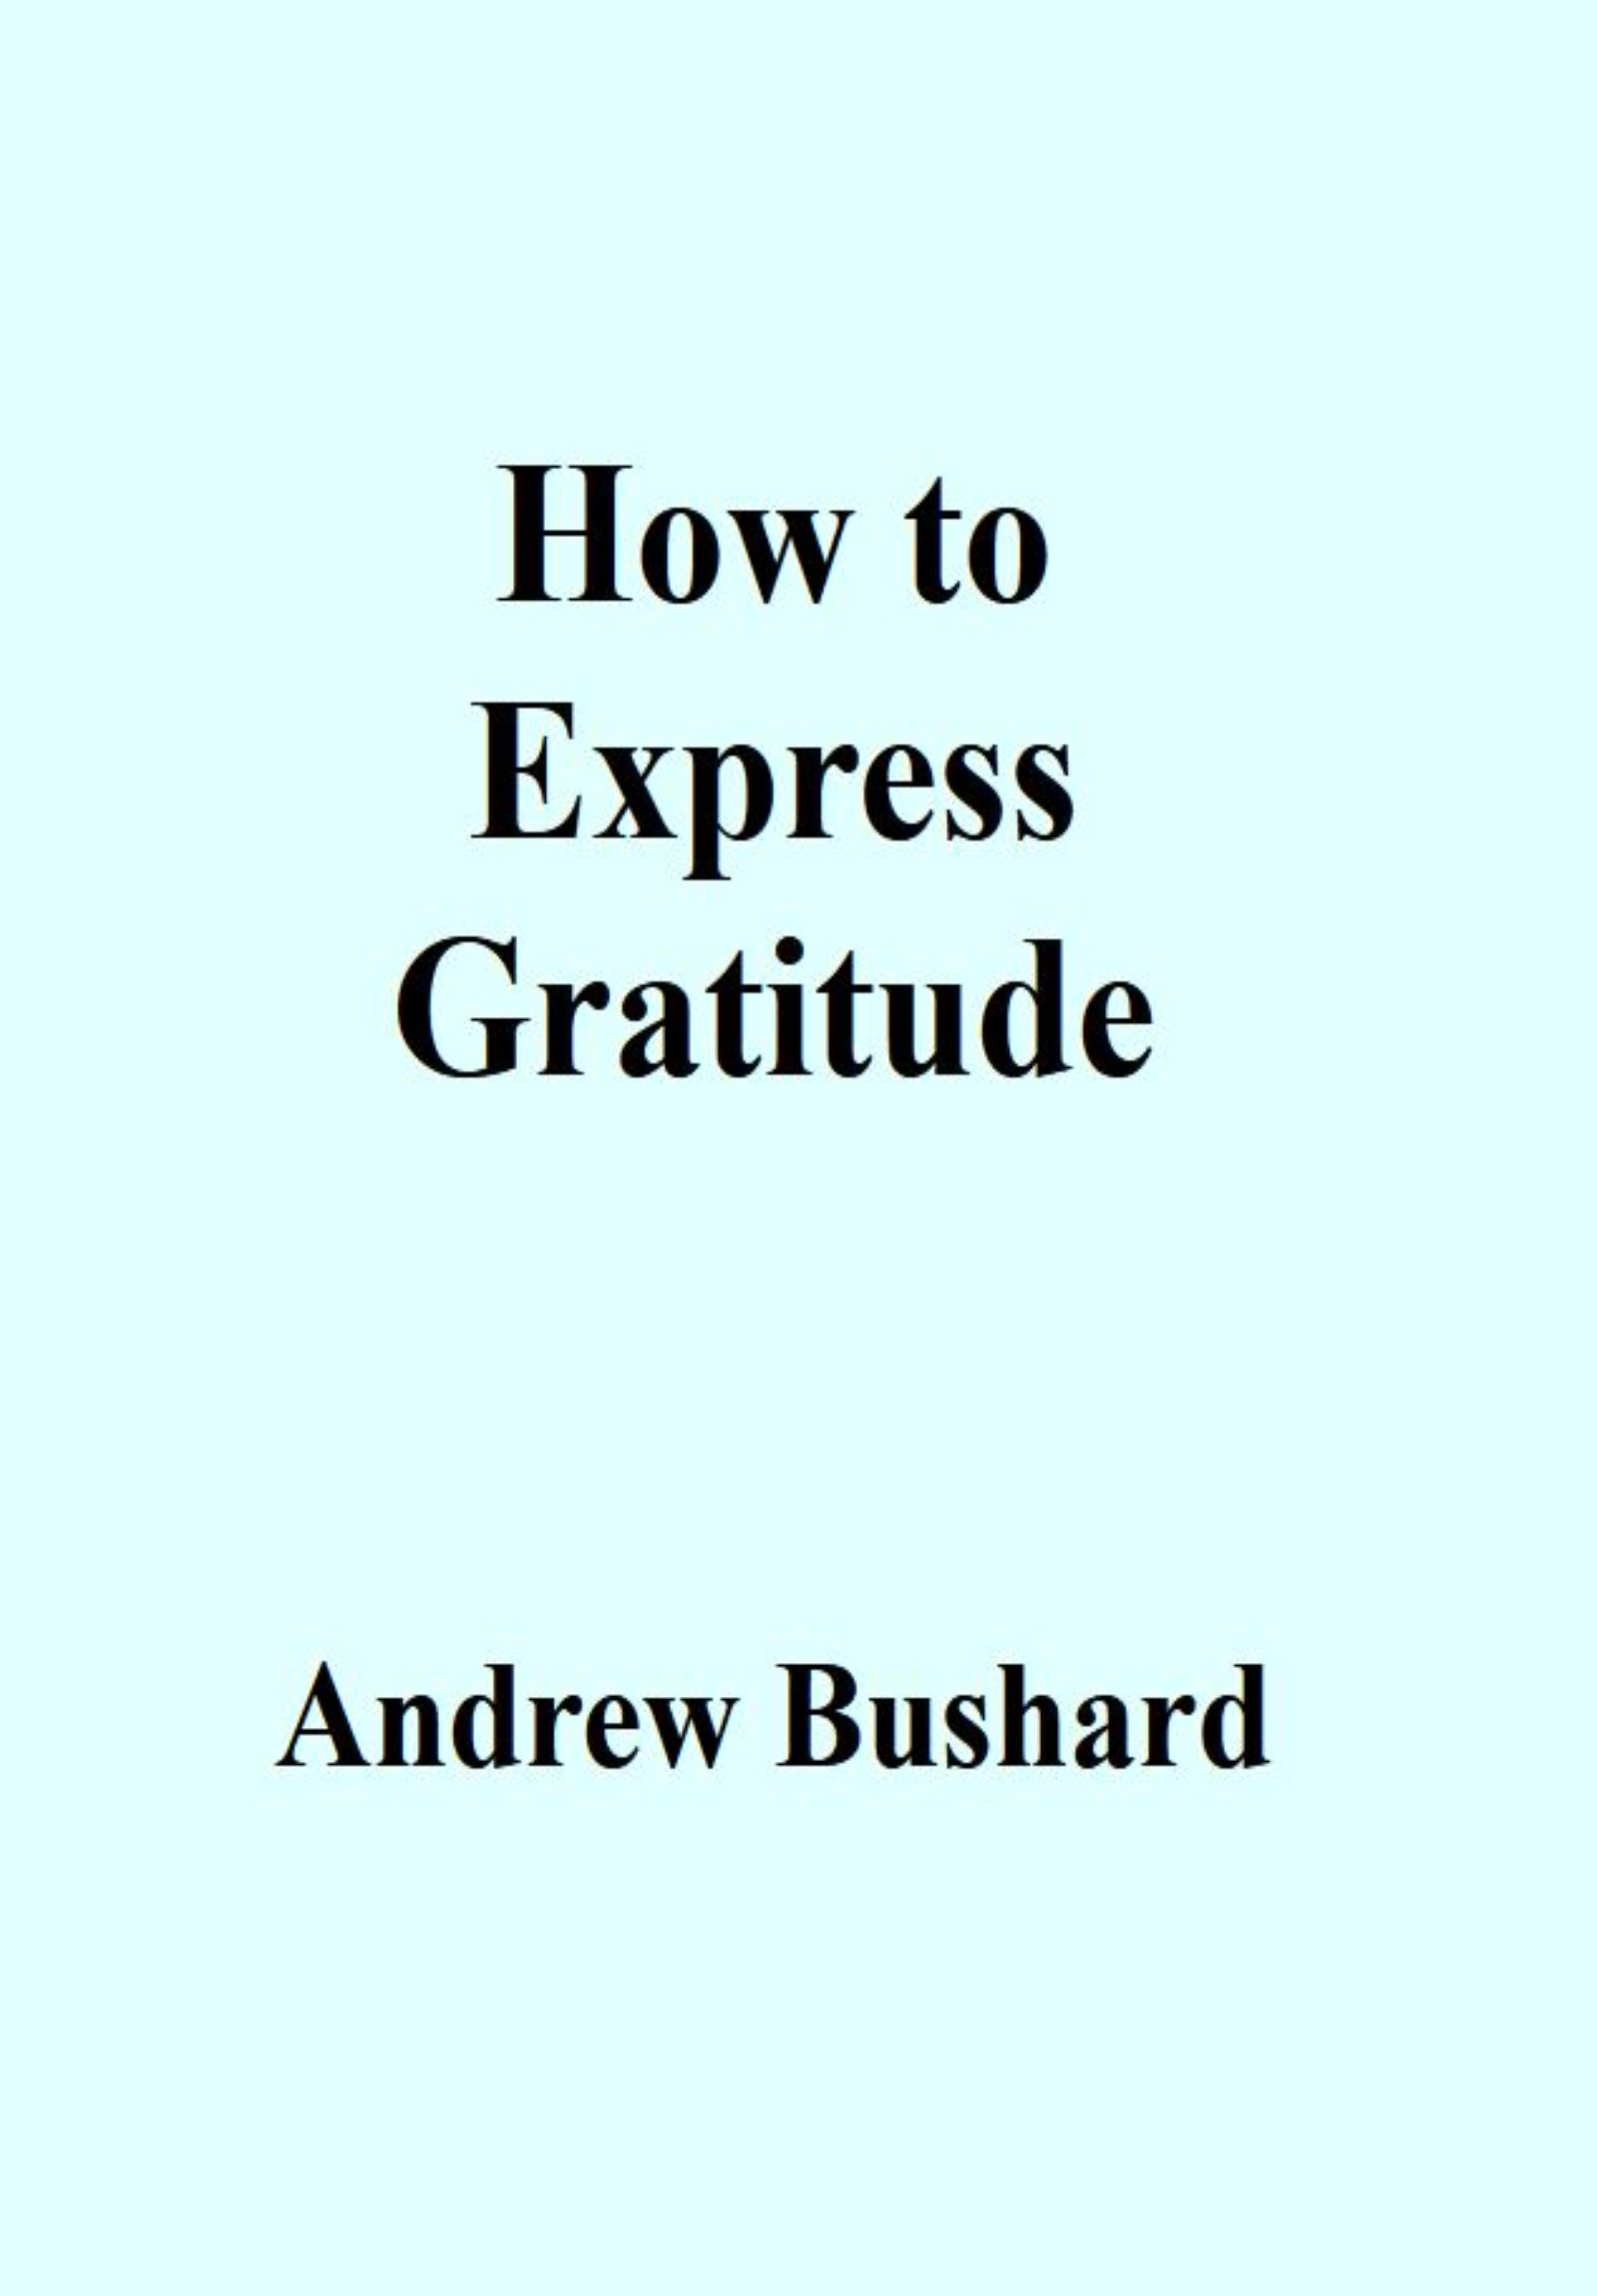 How to Express Gratitude's featured image